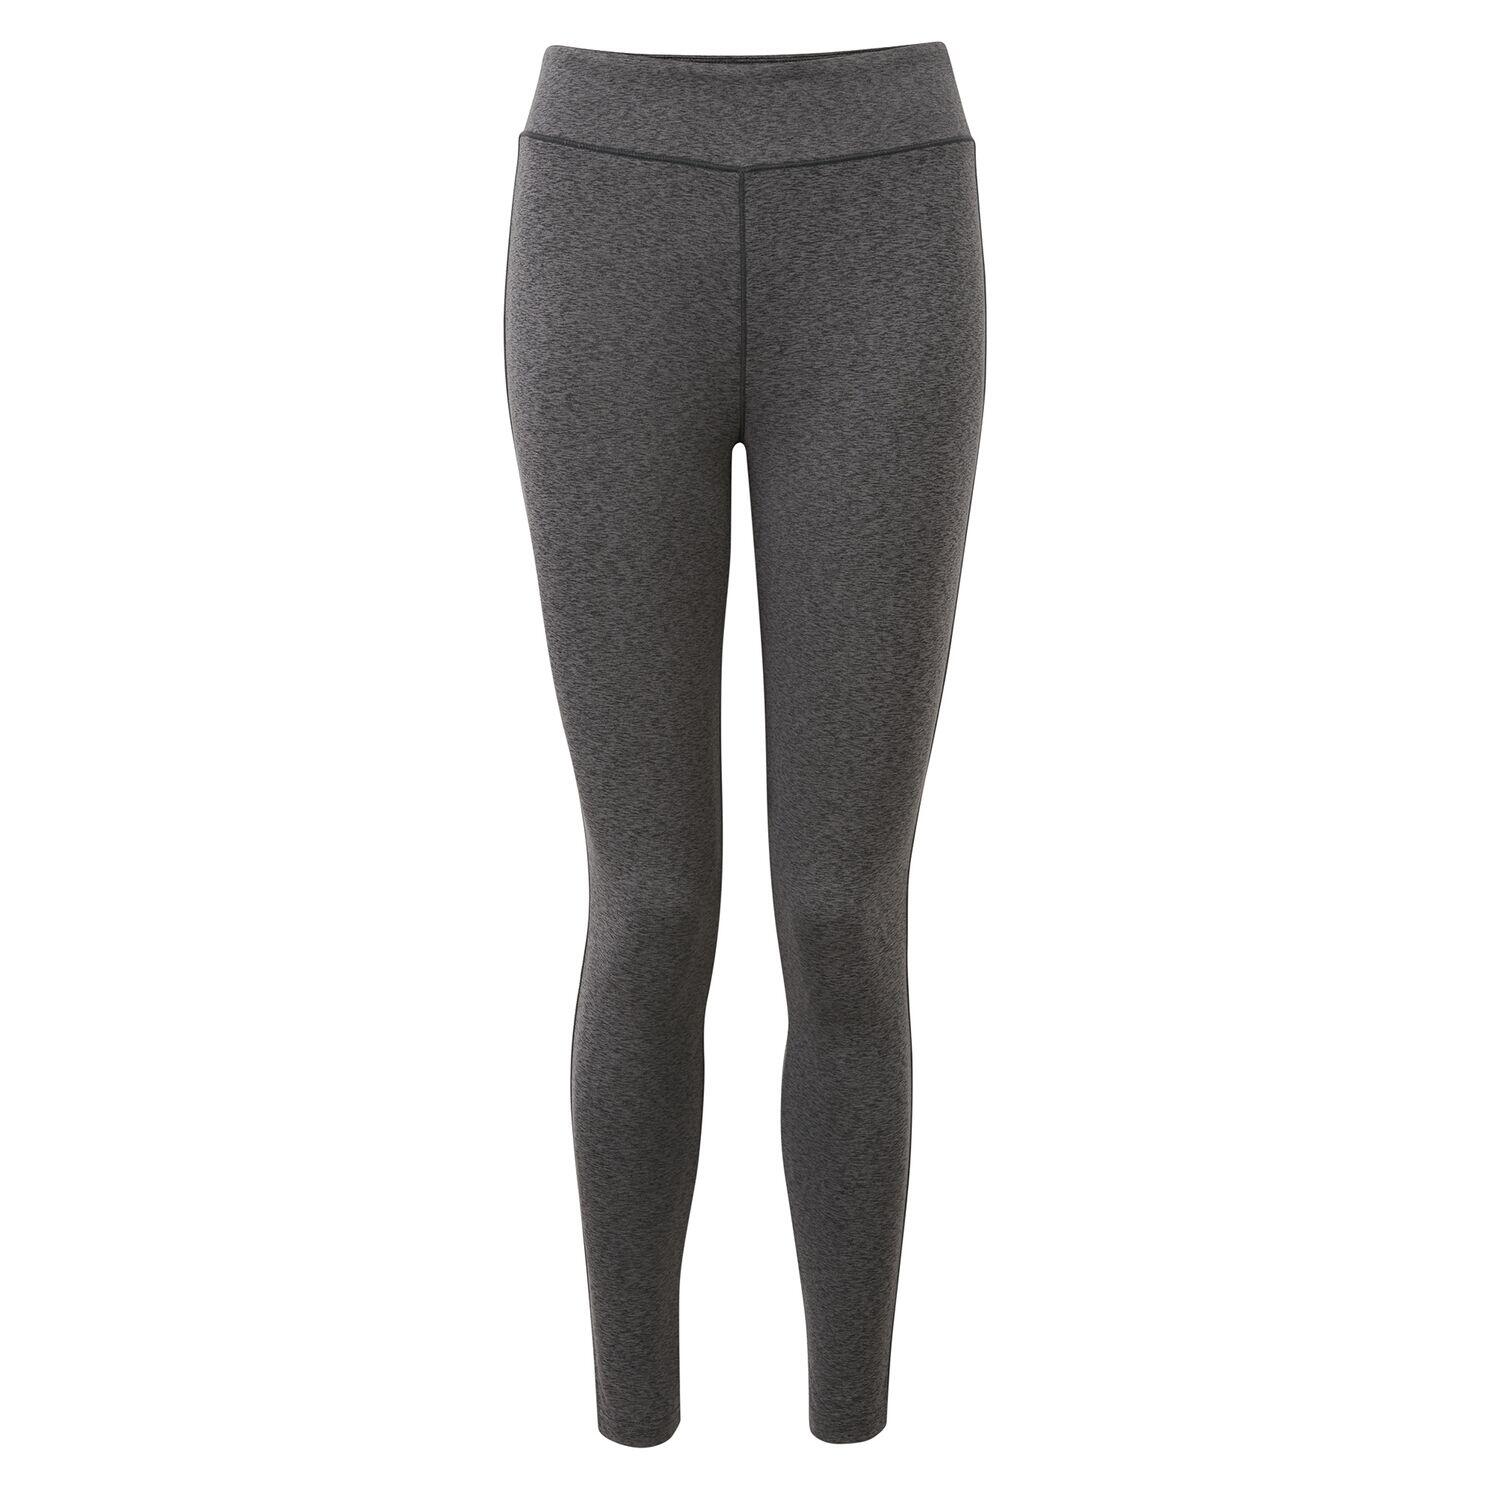 DARE 2B Womens/Ladies Influential Tight Lightweight Gym Leggings (Charcoal Grey)